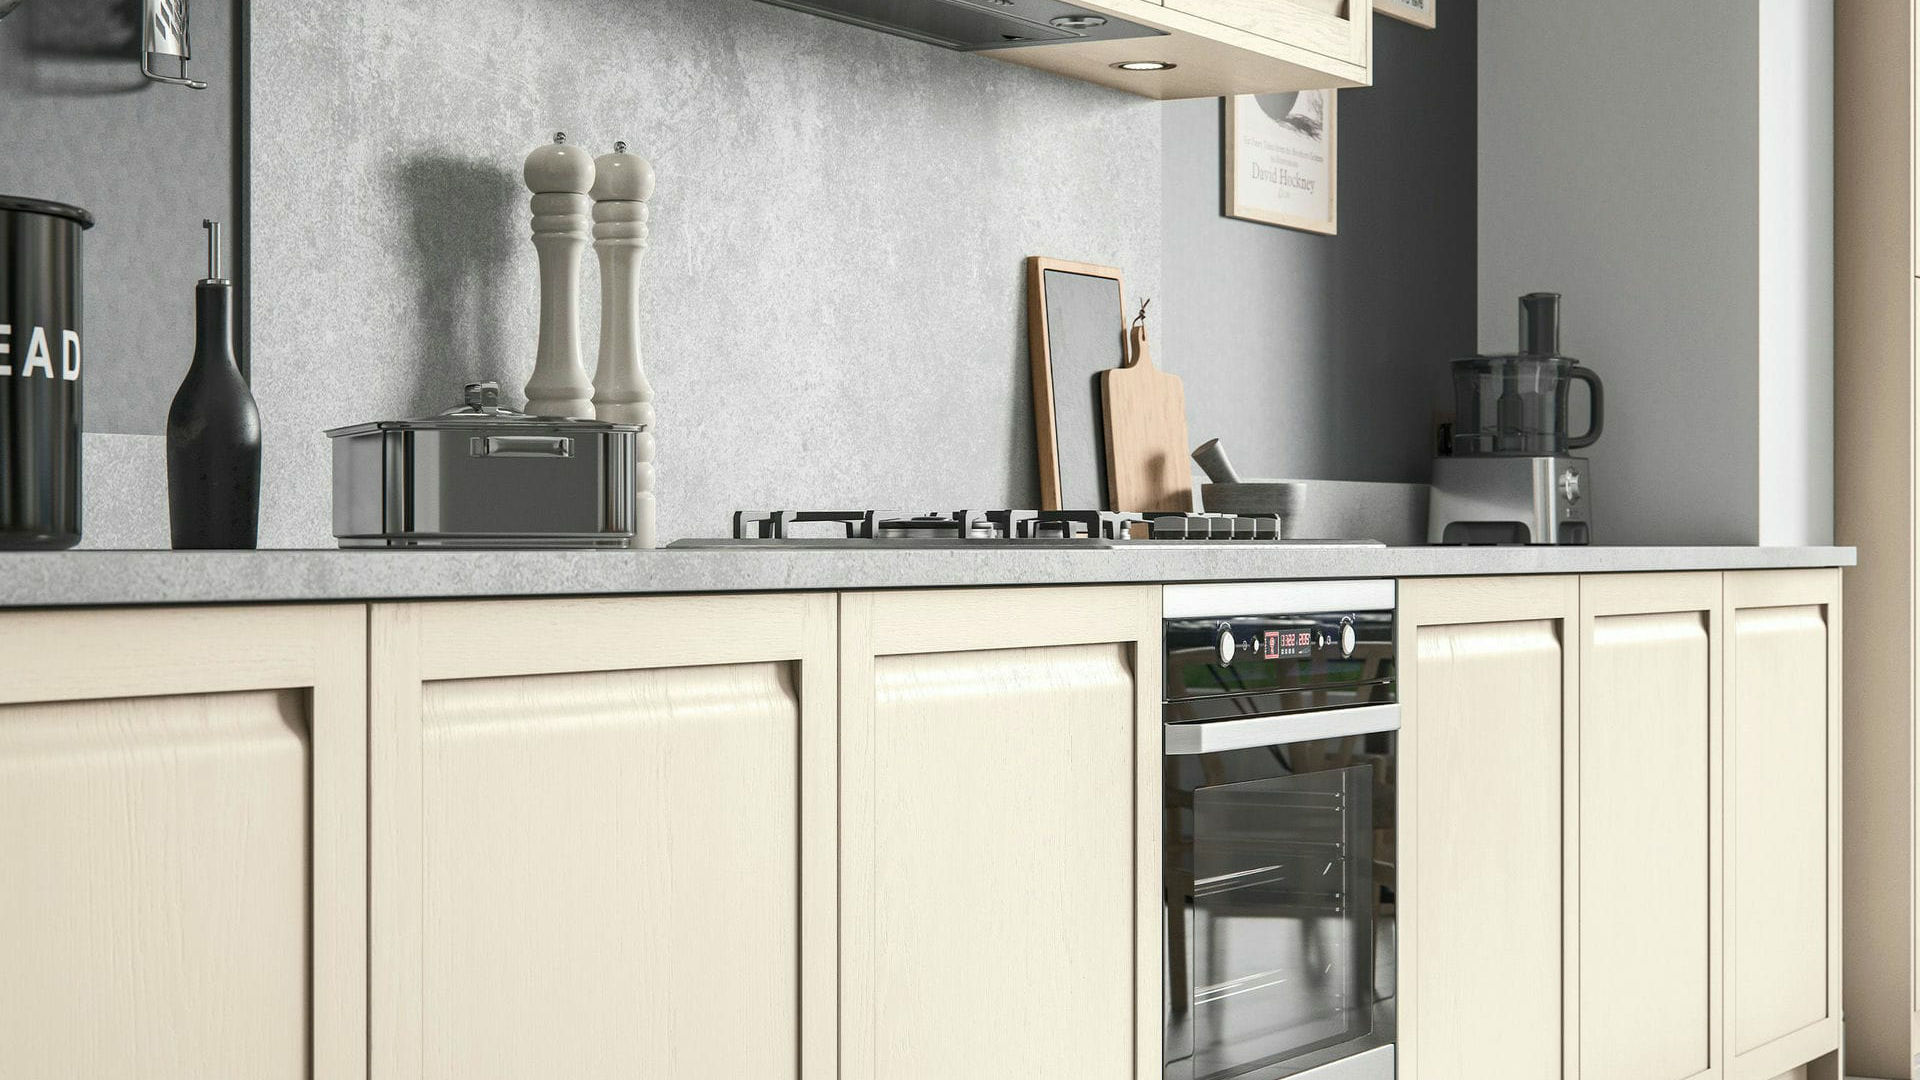 Handleless solid wood shell kitchens showcasing a minimalist design with a smooth, natural wood finish